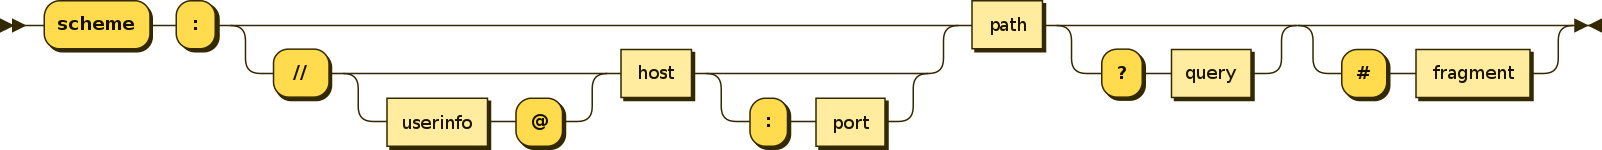 ../_images/URI_syntax_diagram.svg.png